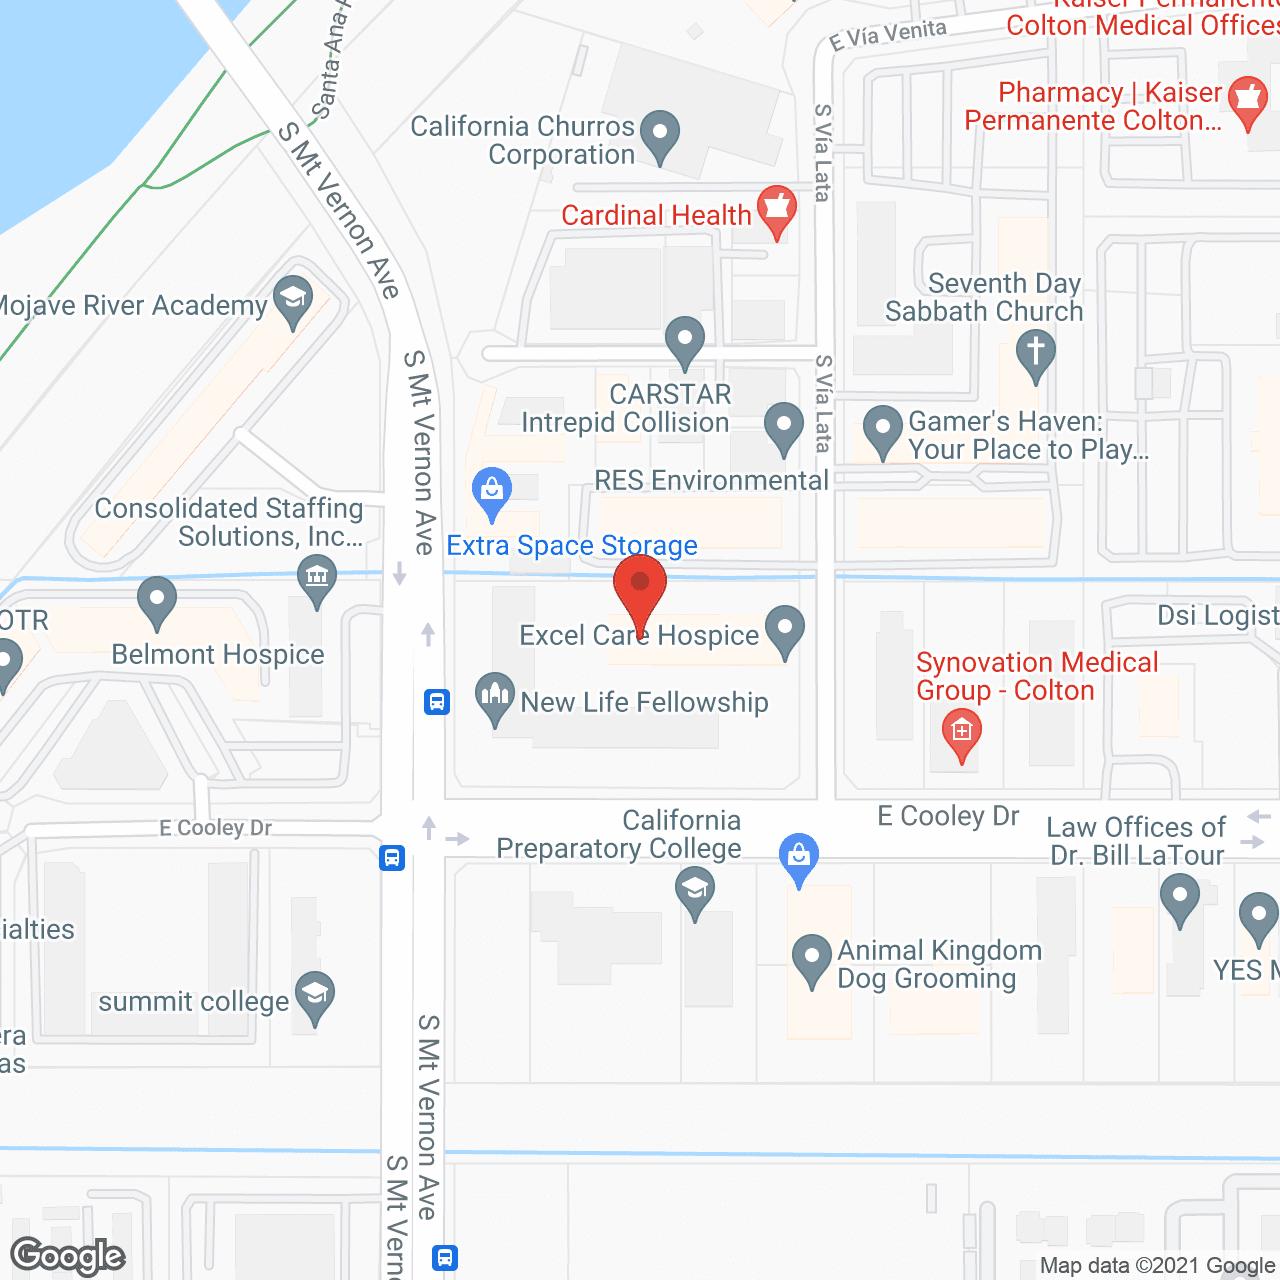 Chaparral Treatment Ctr in google map